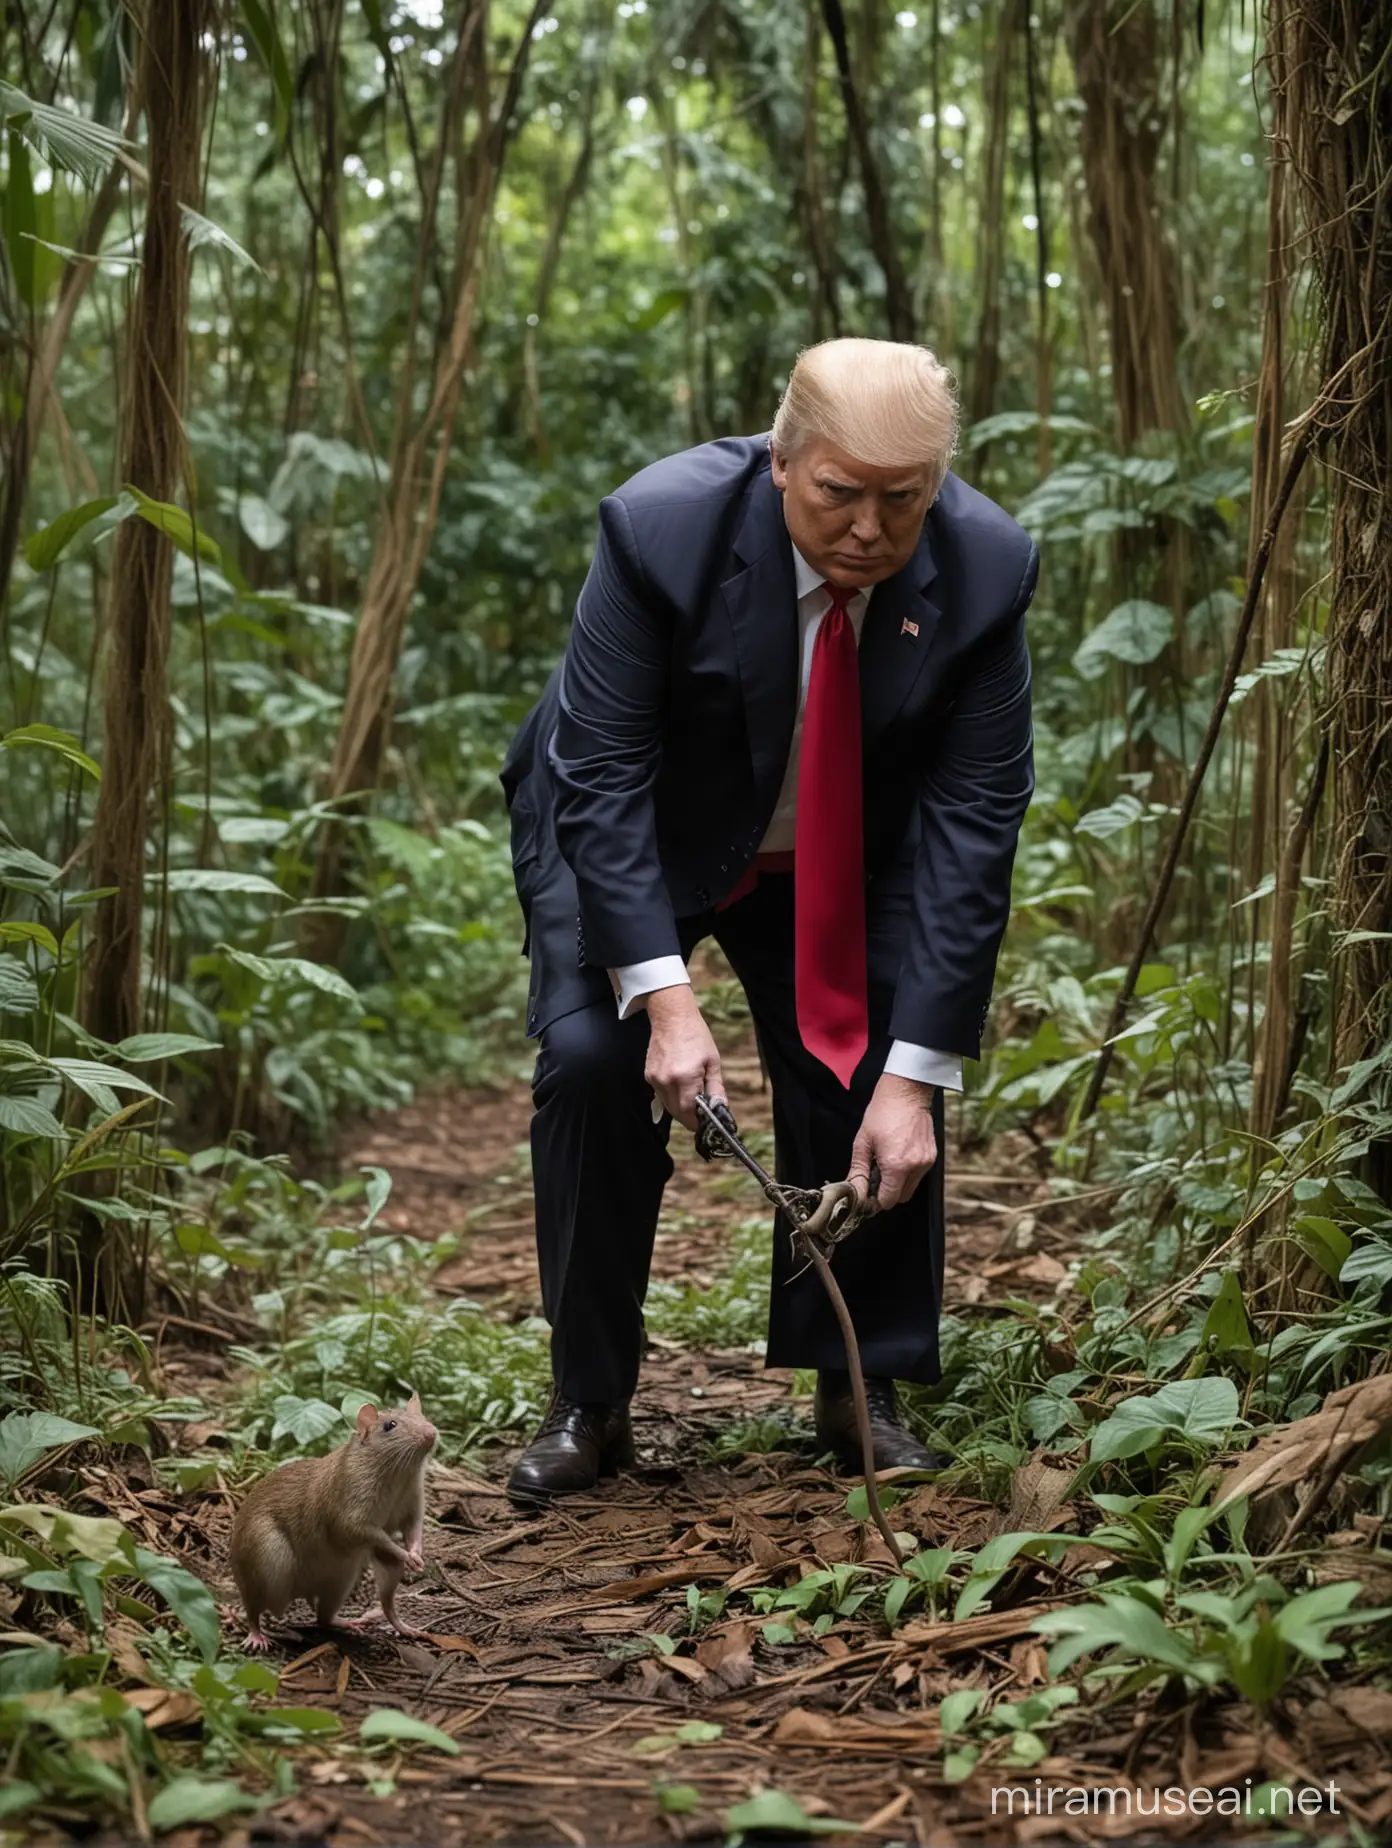 Donald Trump Hunting a Rat in the Jungle